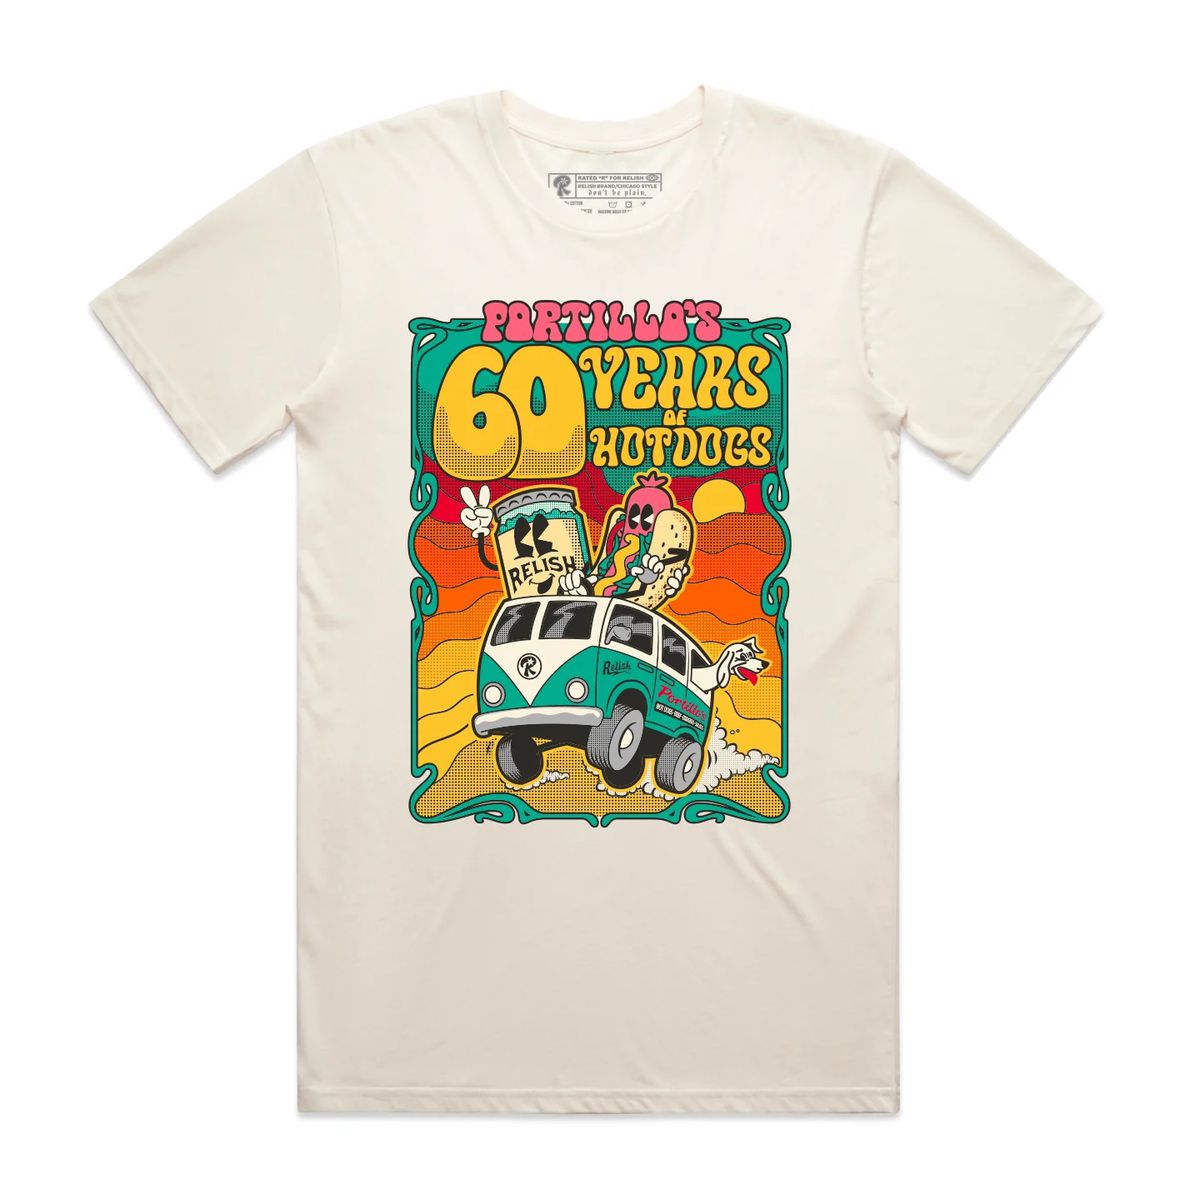 A t-shirt celebrating 60 years of Portillo’s